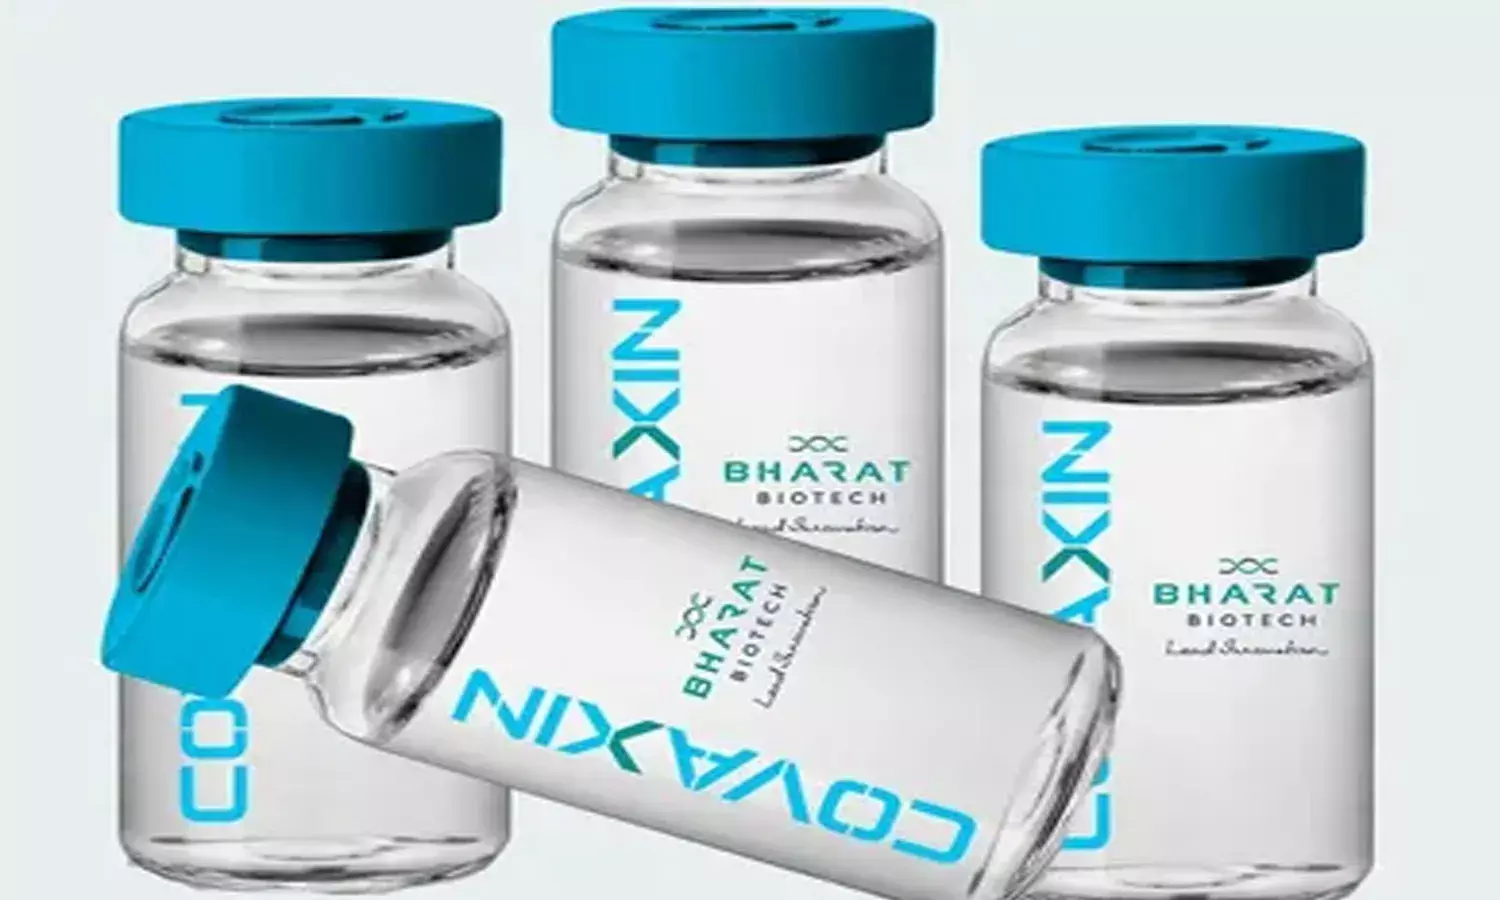 We trust India, Bharat Biotech has submitted data regularly: WHO on Covaxin EUL